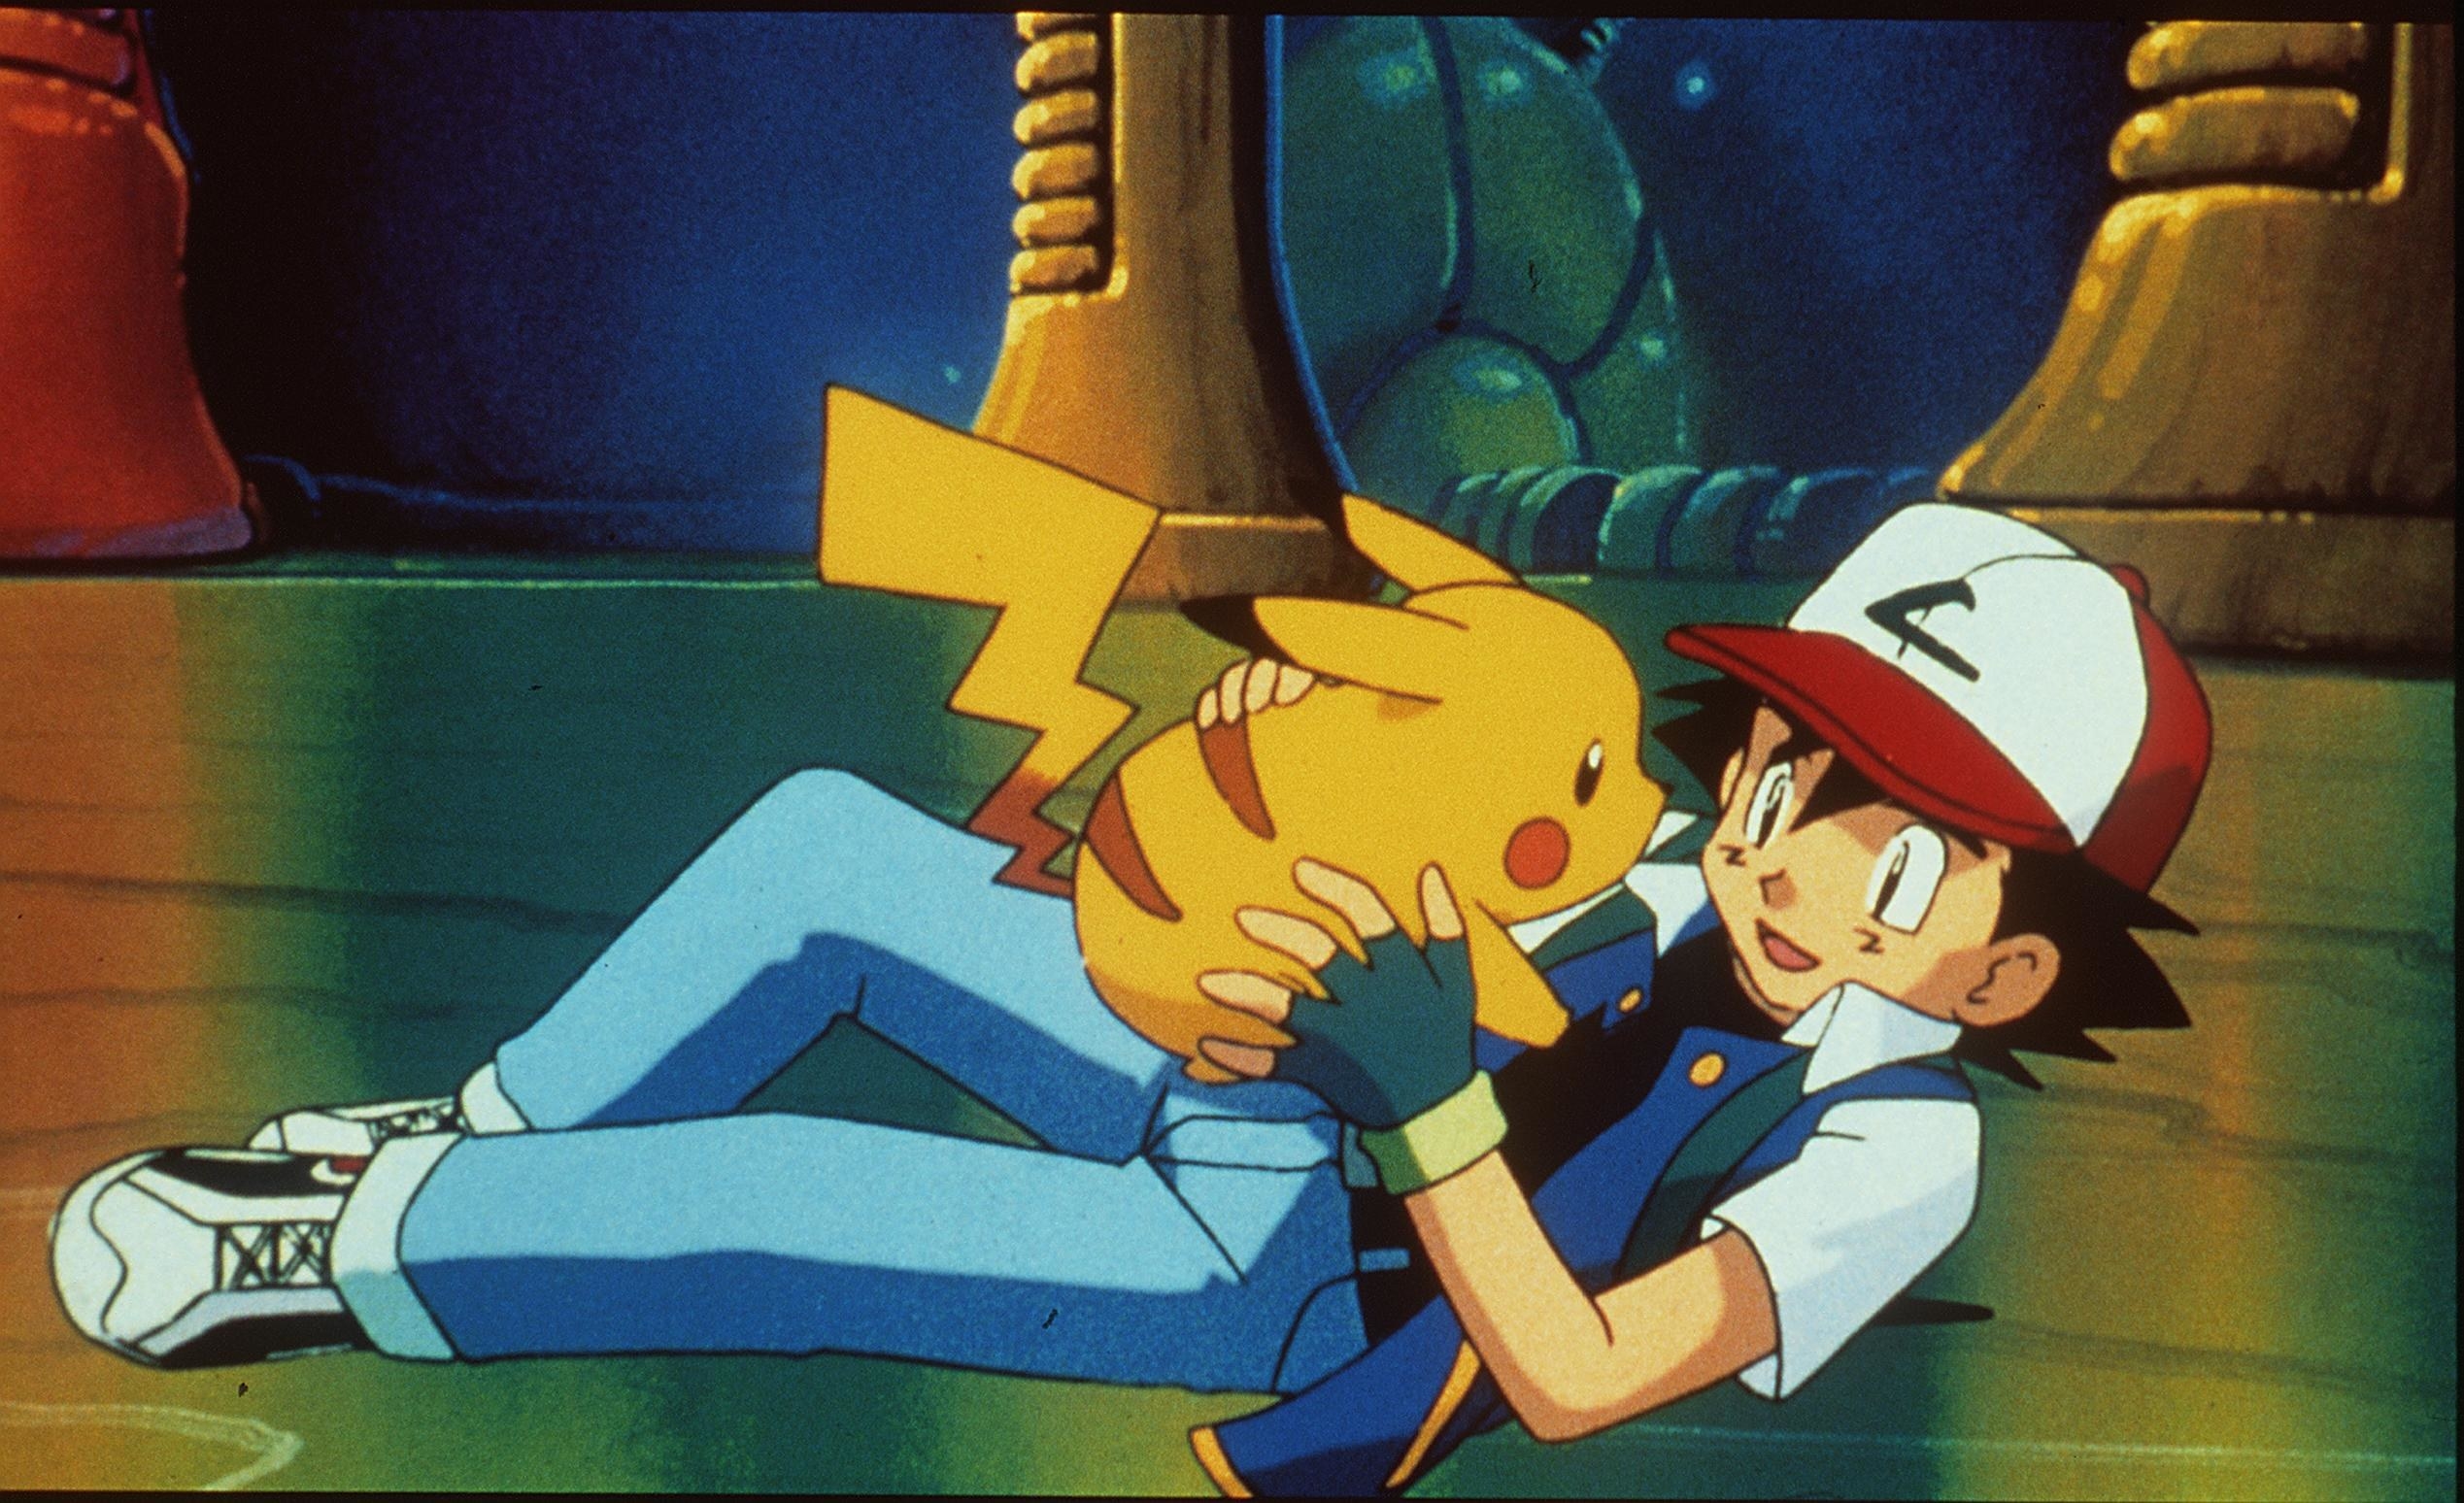 Pikachu being picked up by Ash Ketchum who is on the ground